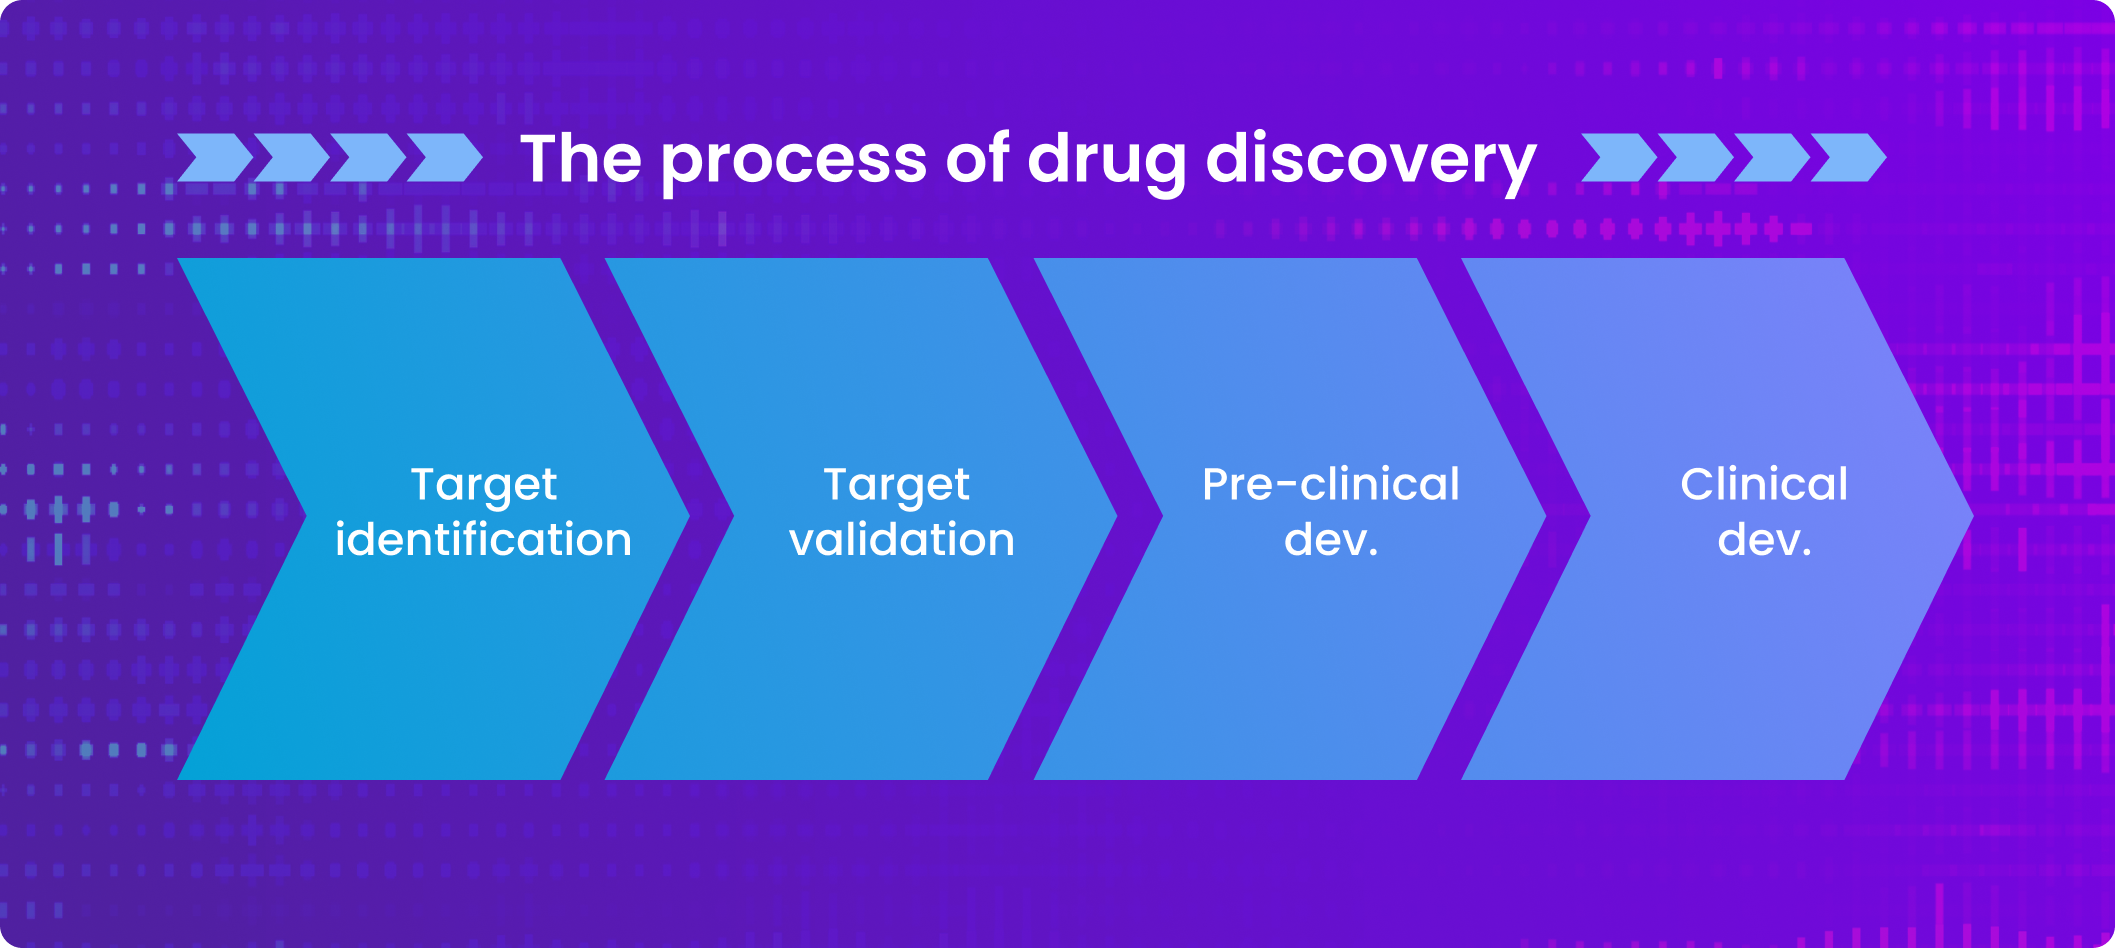 The drug discovery process has 4 key phases: target identification, target validation, pre clinical development and clinical development.